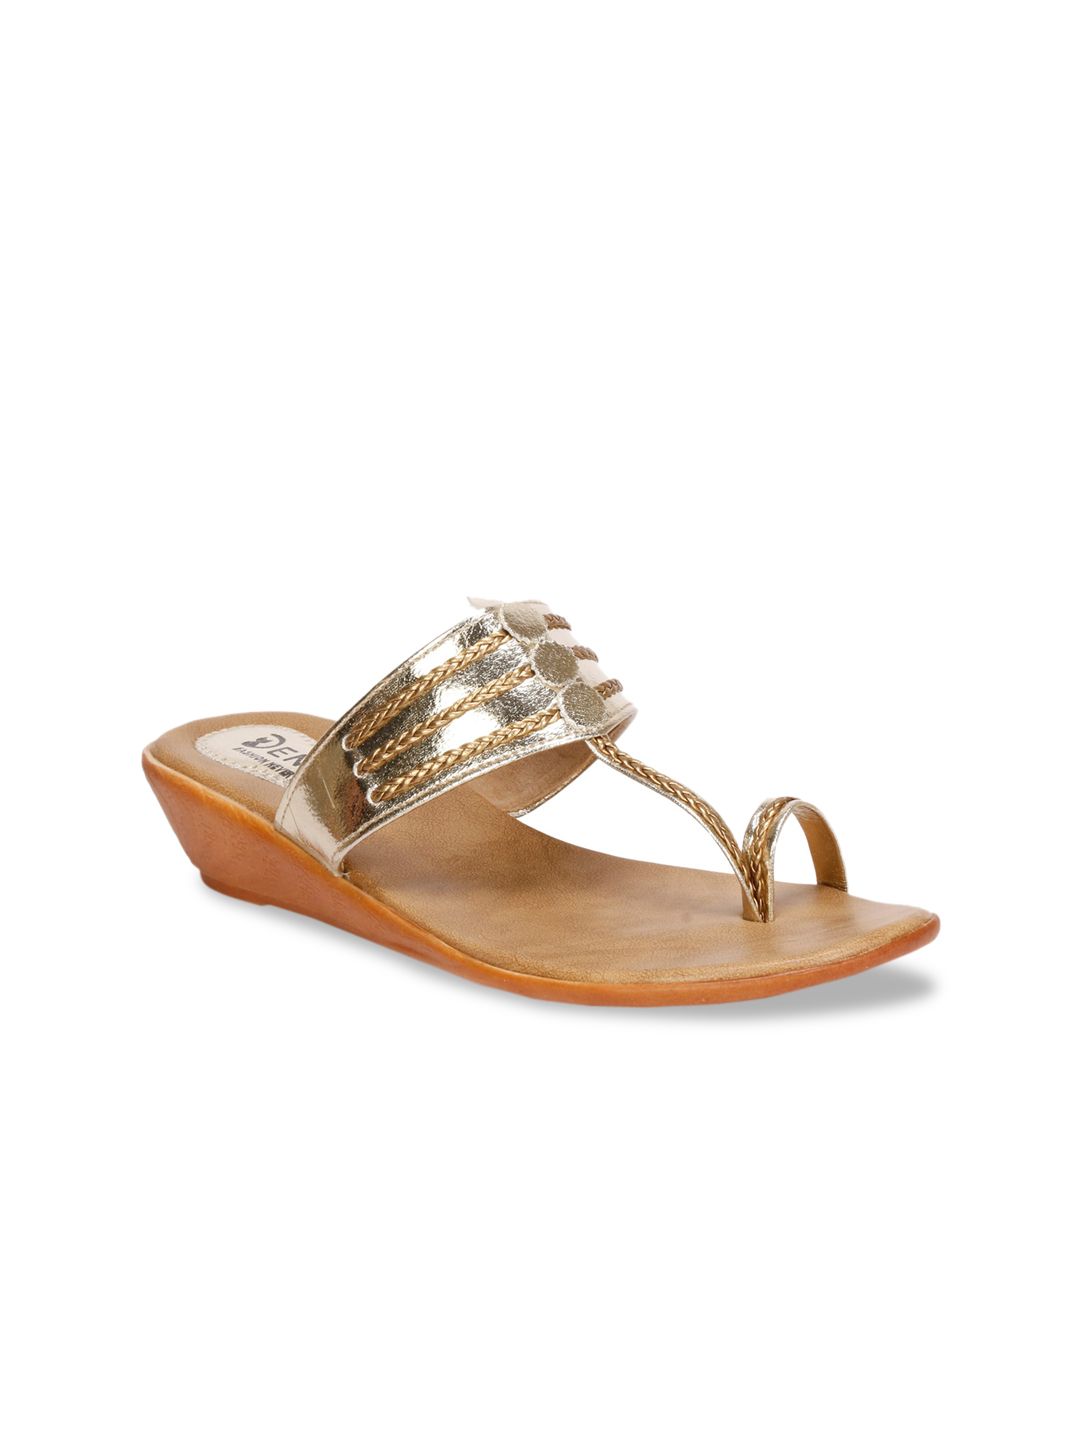 Denill Gold-Toned Wedge Sandals Price in India